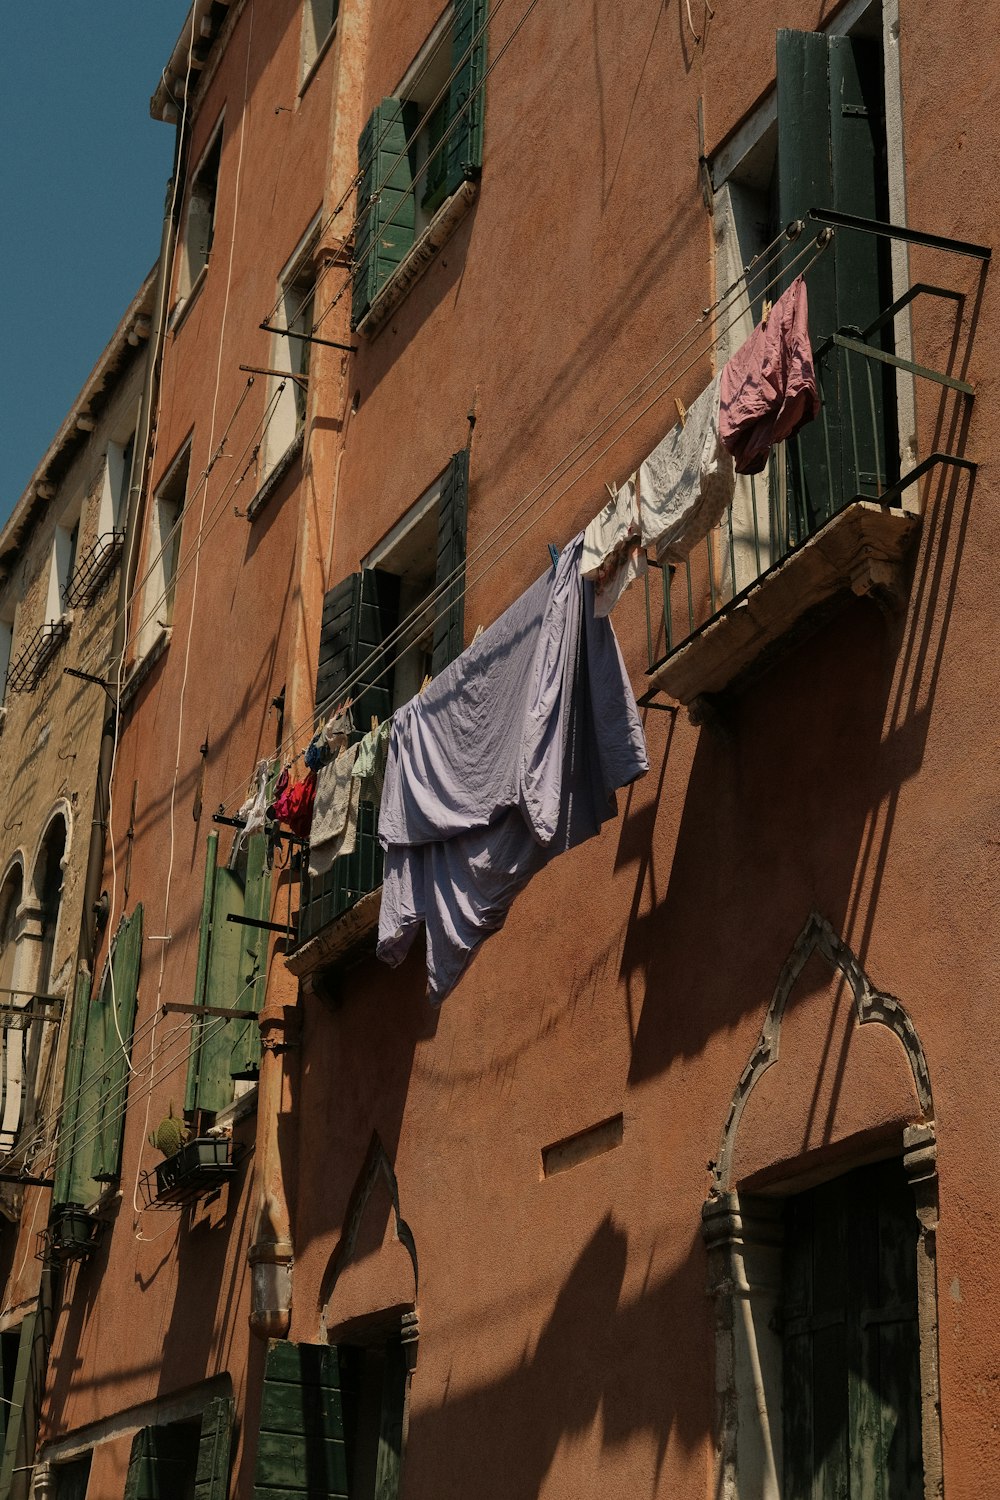 clothes hanging out to dry outside of a building